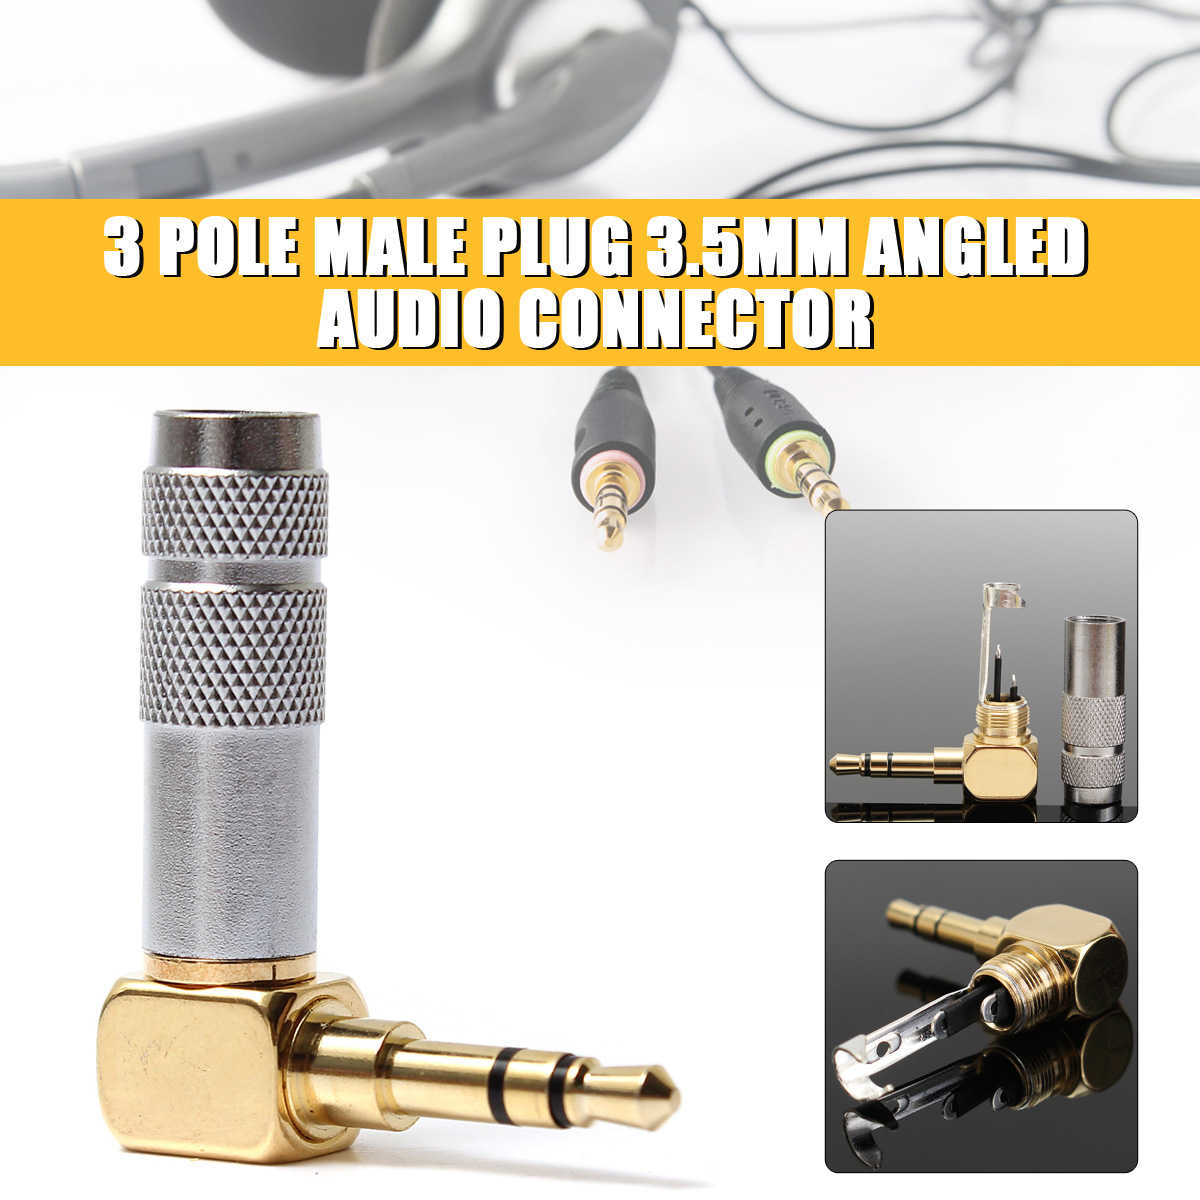 35mm-Audio-Connector-Three-level-Three-section-90-degree-Headphone-Audio-Jack-35mm-Stereo-Pin-Elbow-1761015